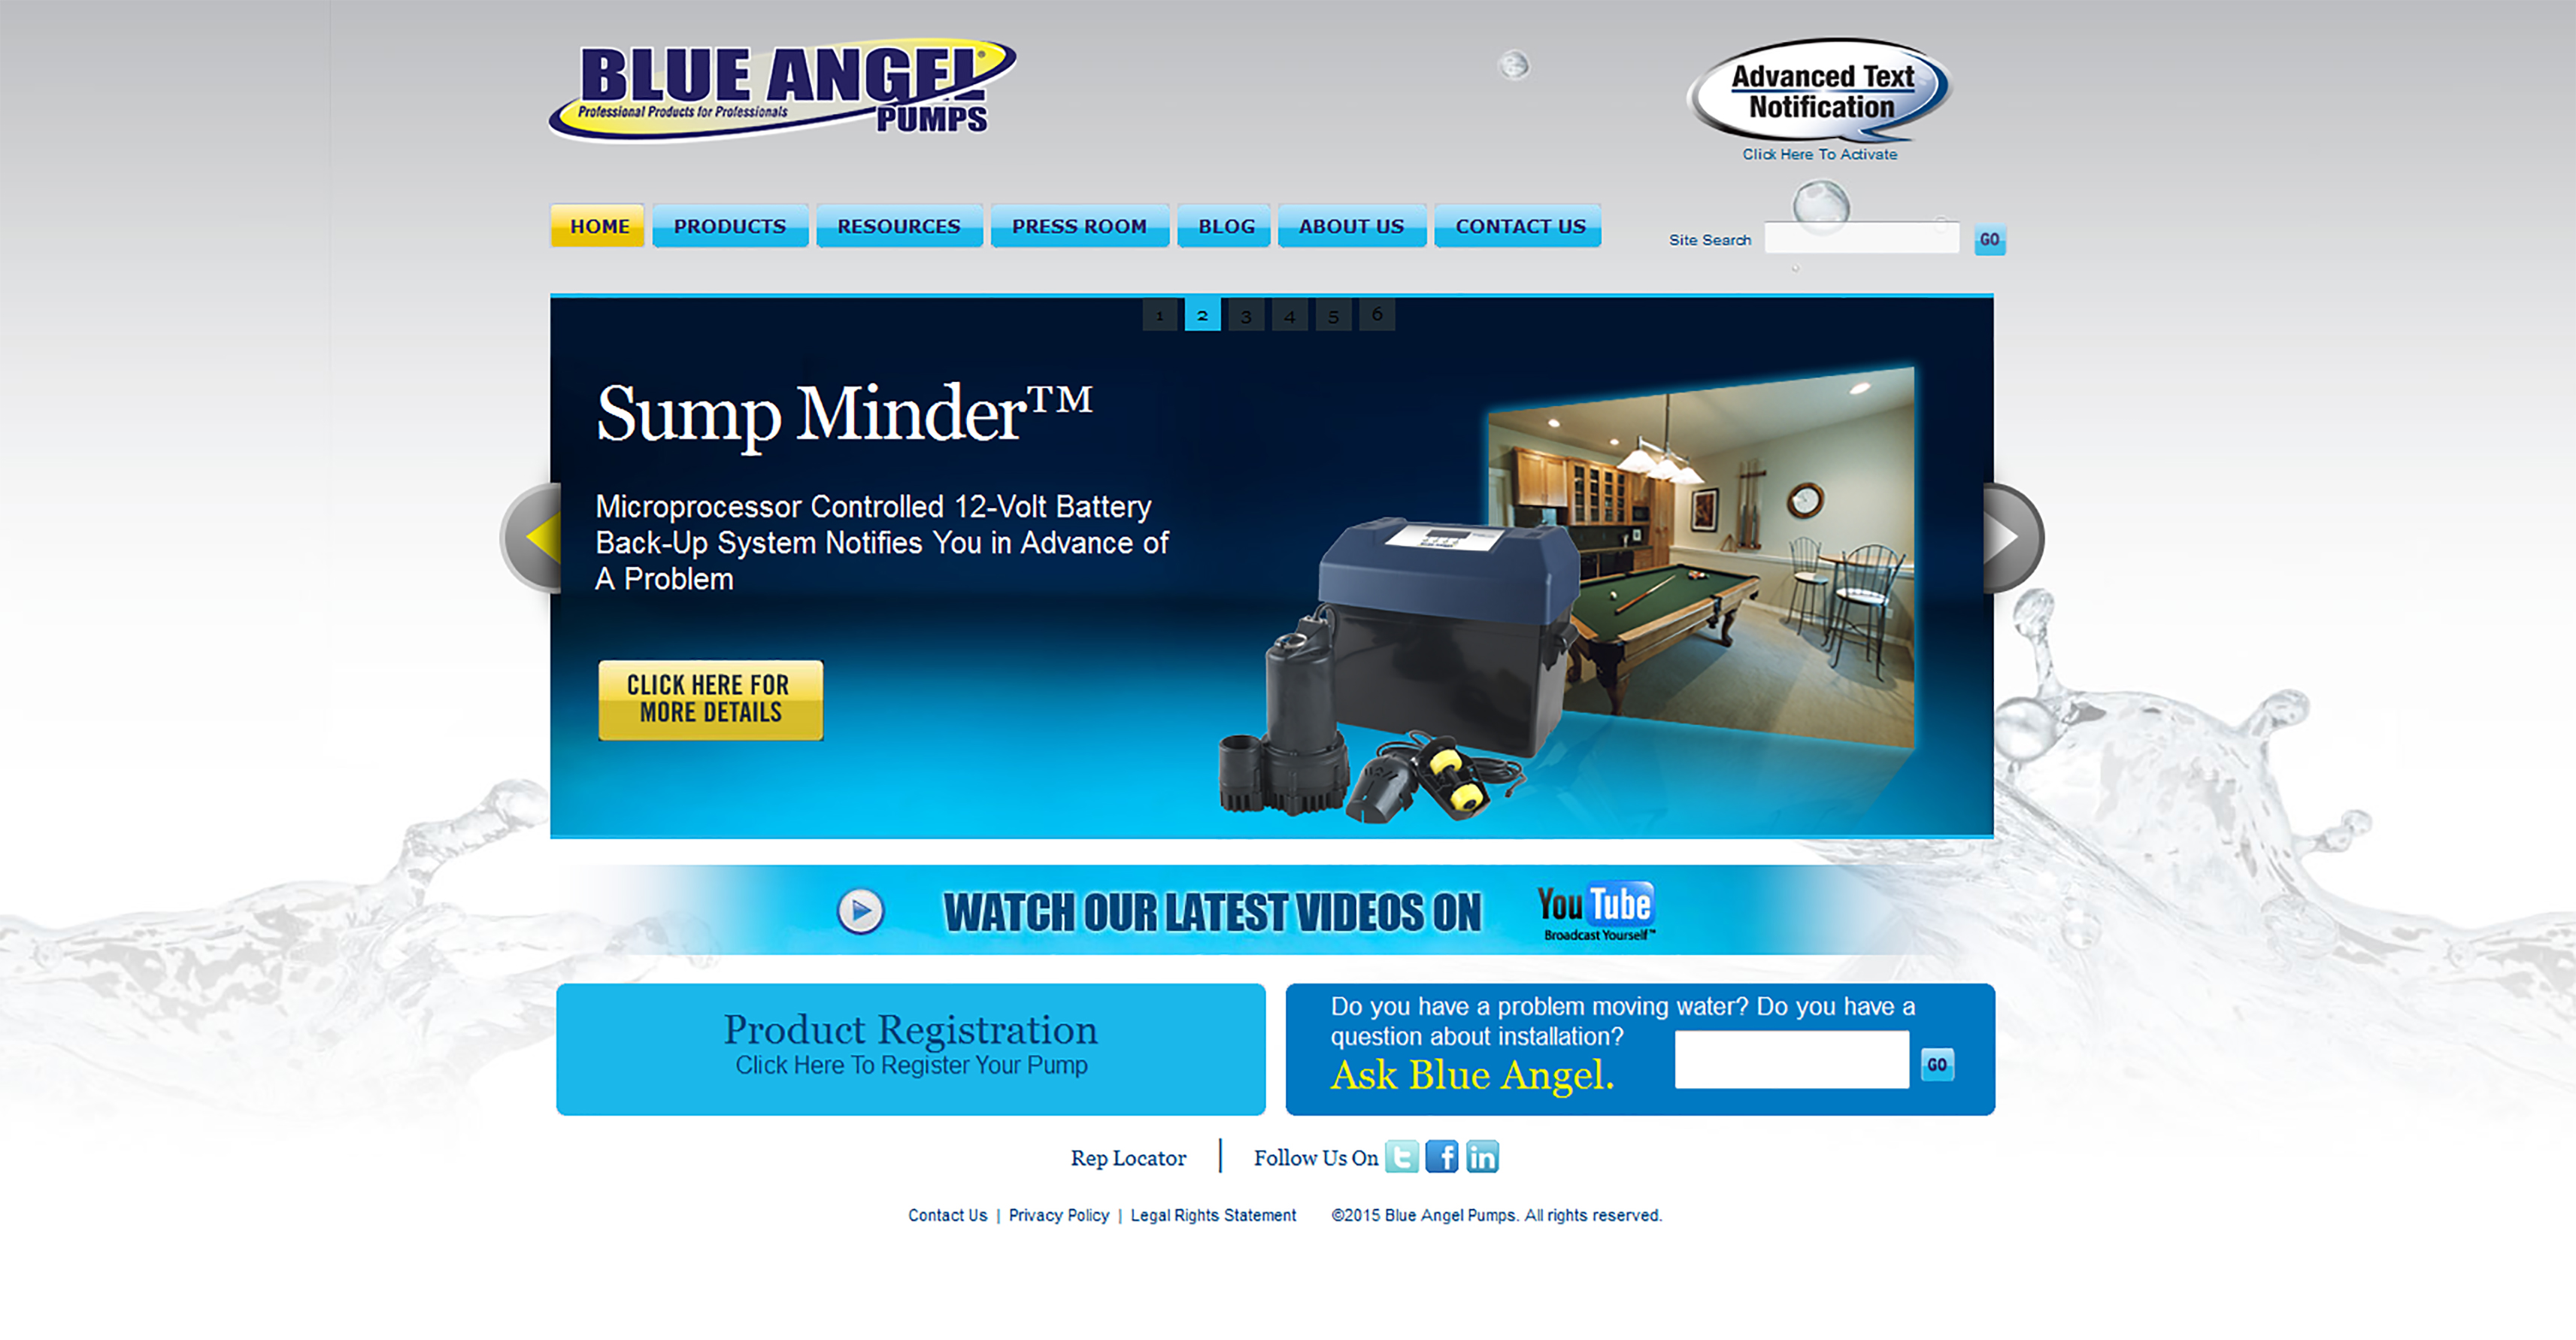 Blue Angel Pump's revitalize website has YouTube videos and tips for installation.